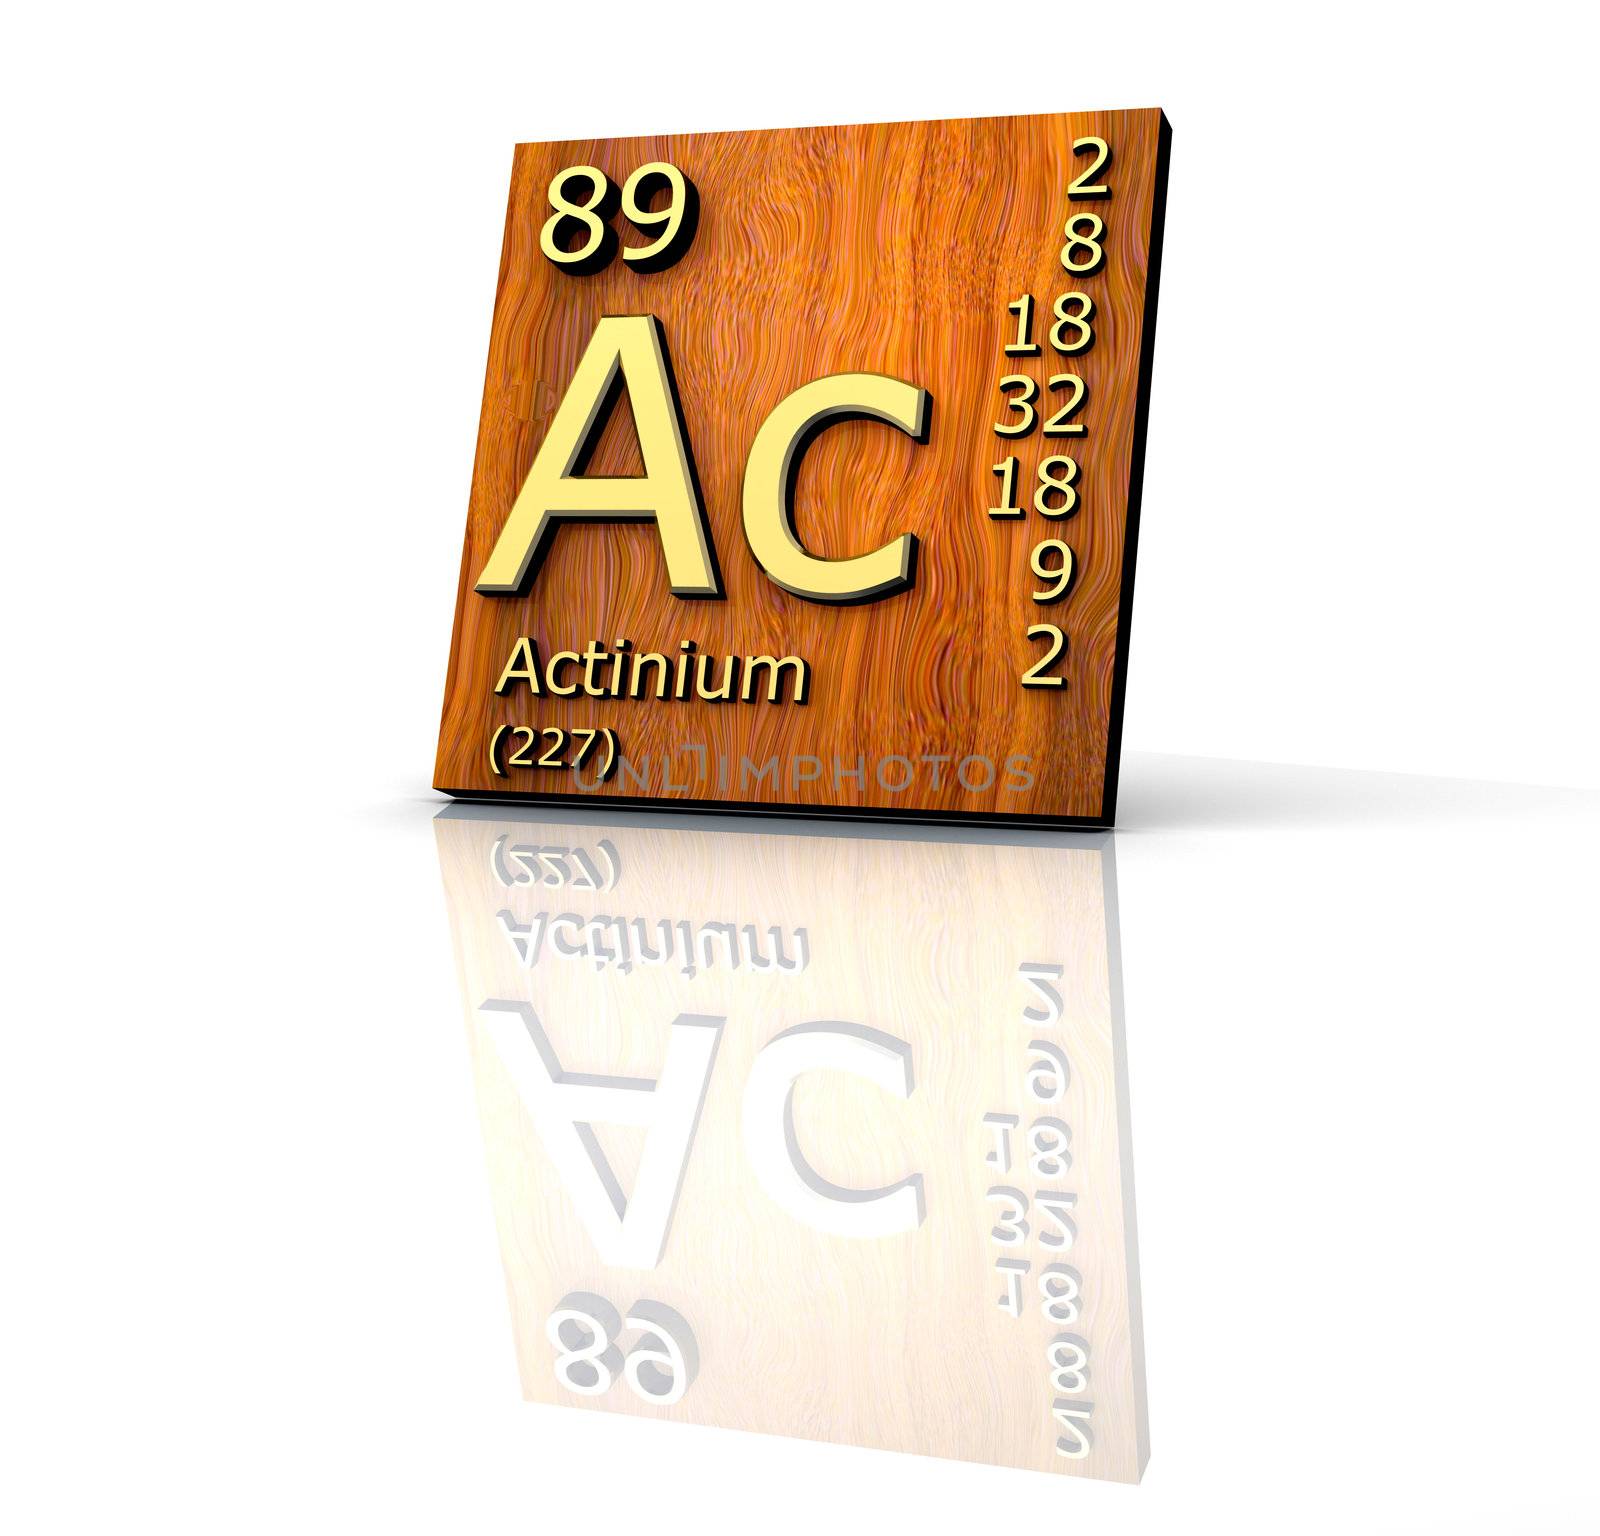 Actinium form Periodic Table of Elements - wood board - 3d made